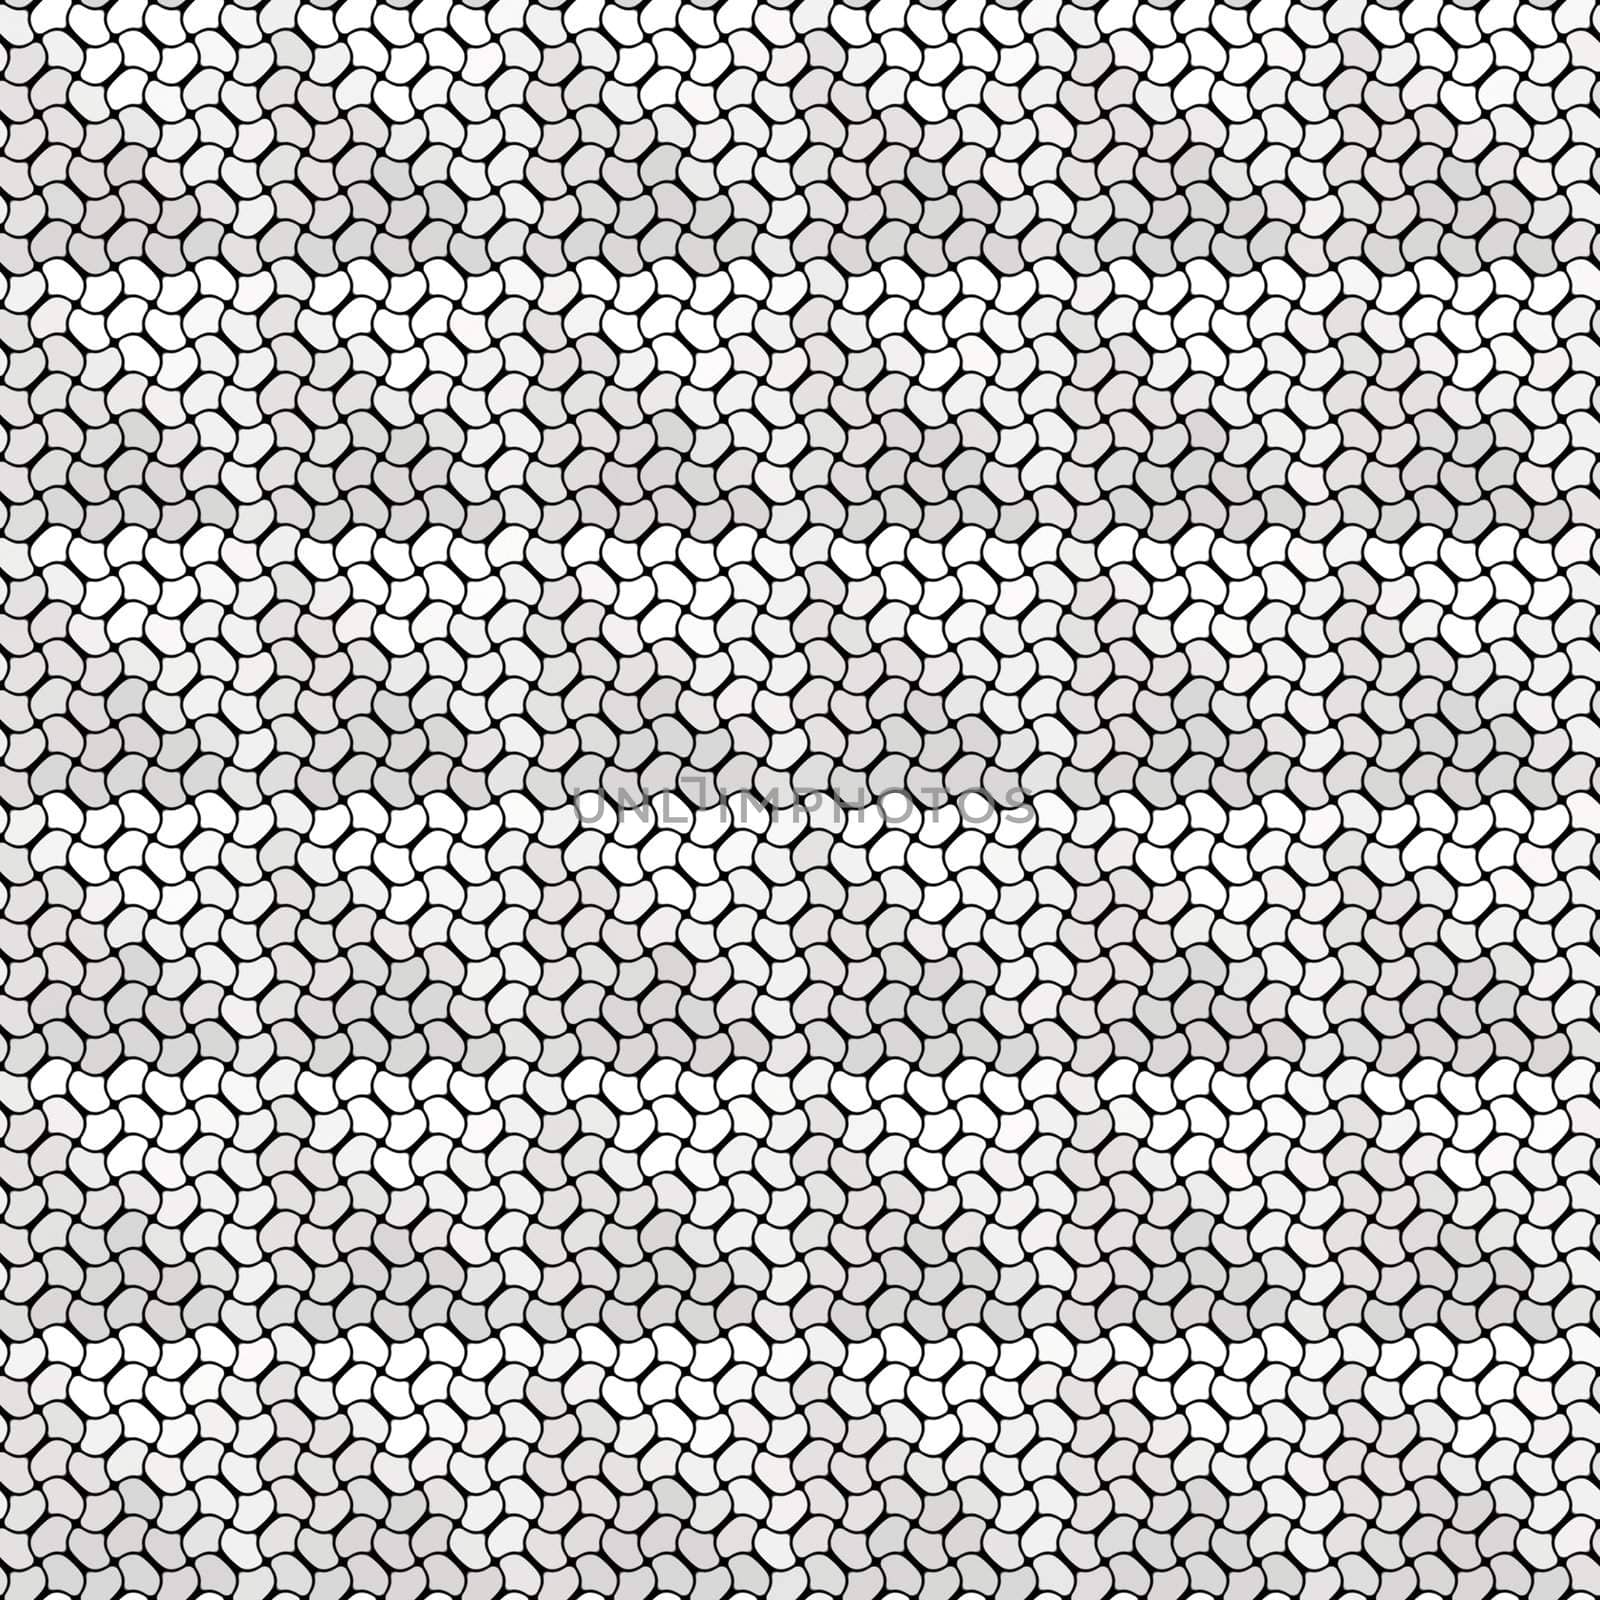 seamless texture of small weaved grey and white shapes